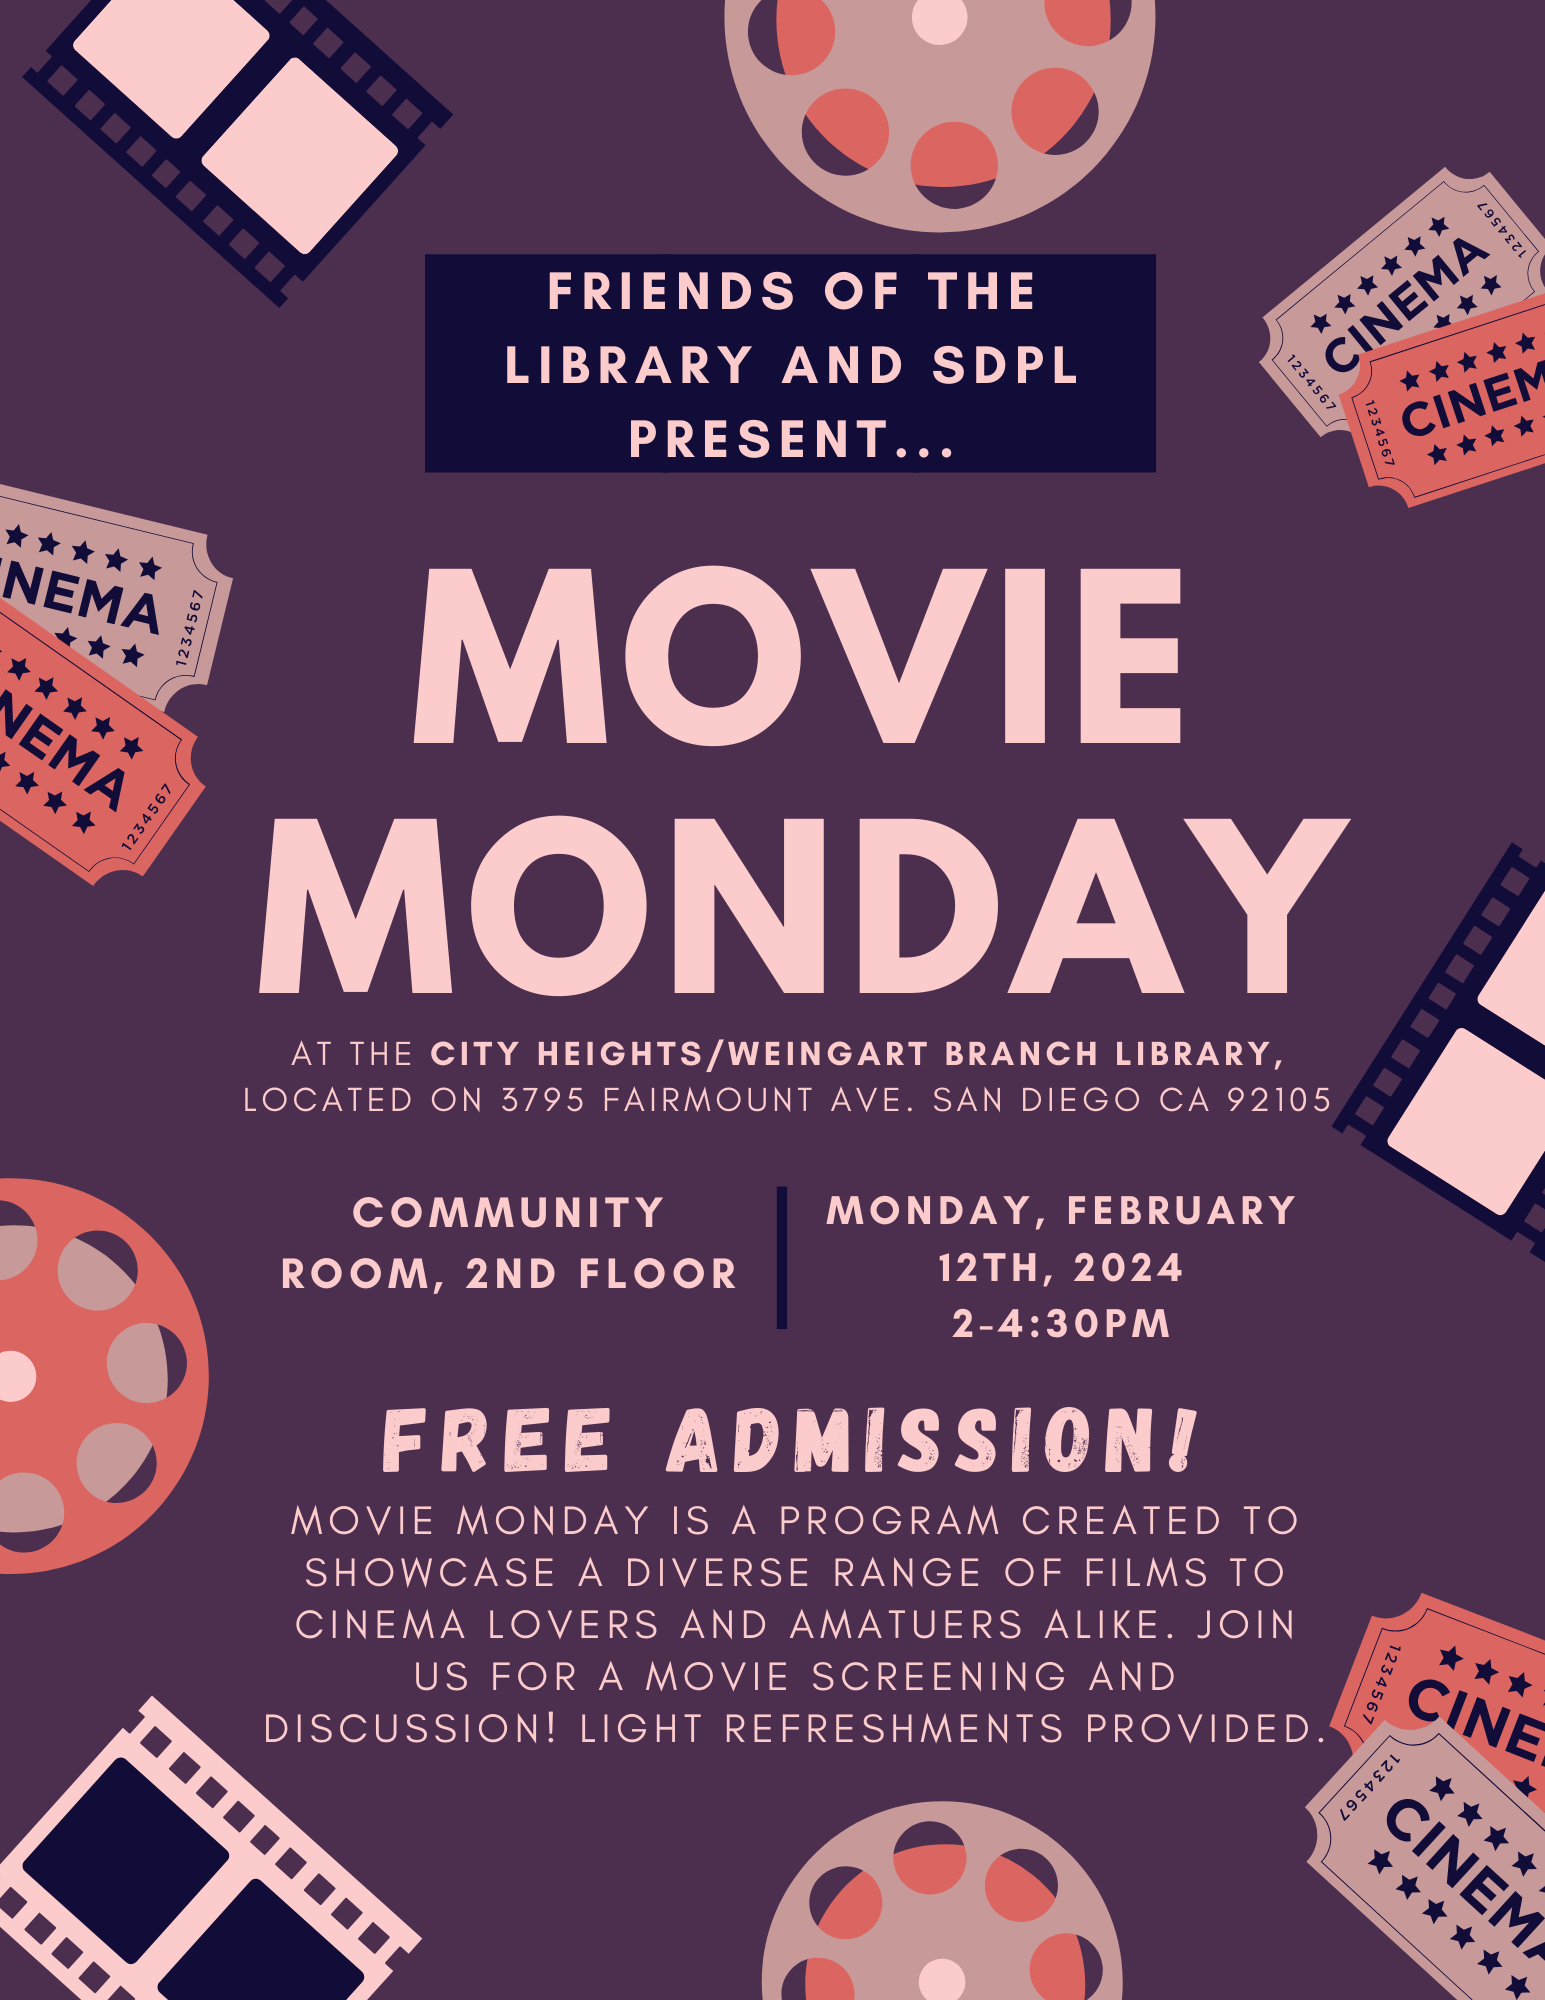 Monday Movie followed by discussion, February 12th, 2-4:30pm. 